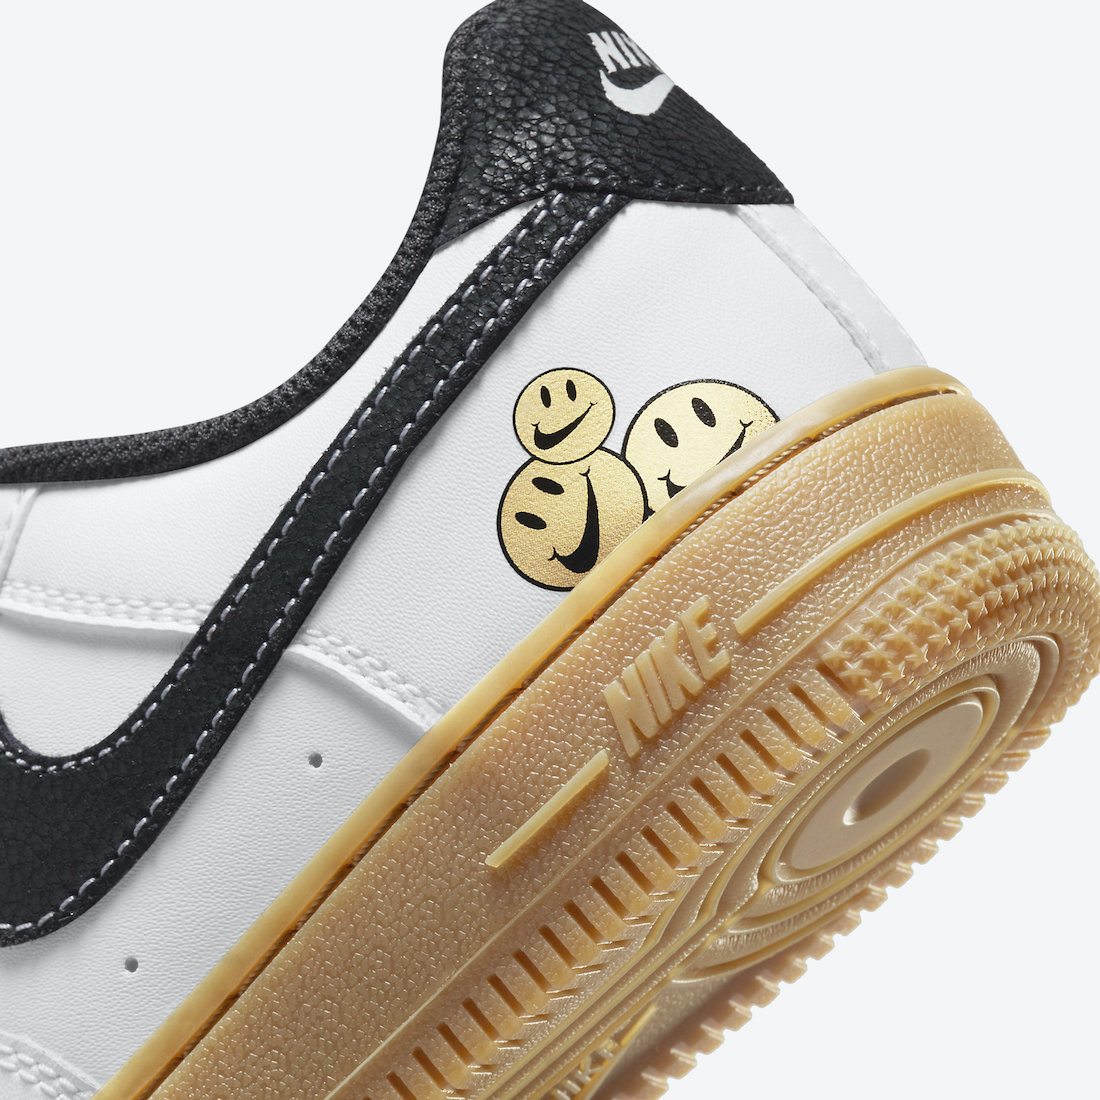 nike air force 1 smiley